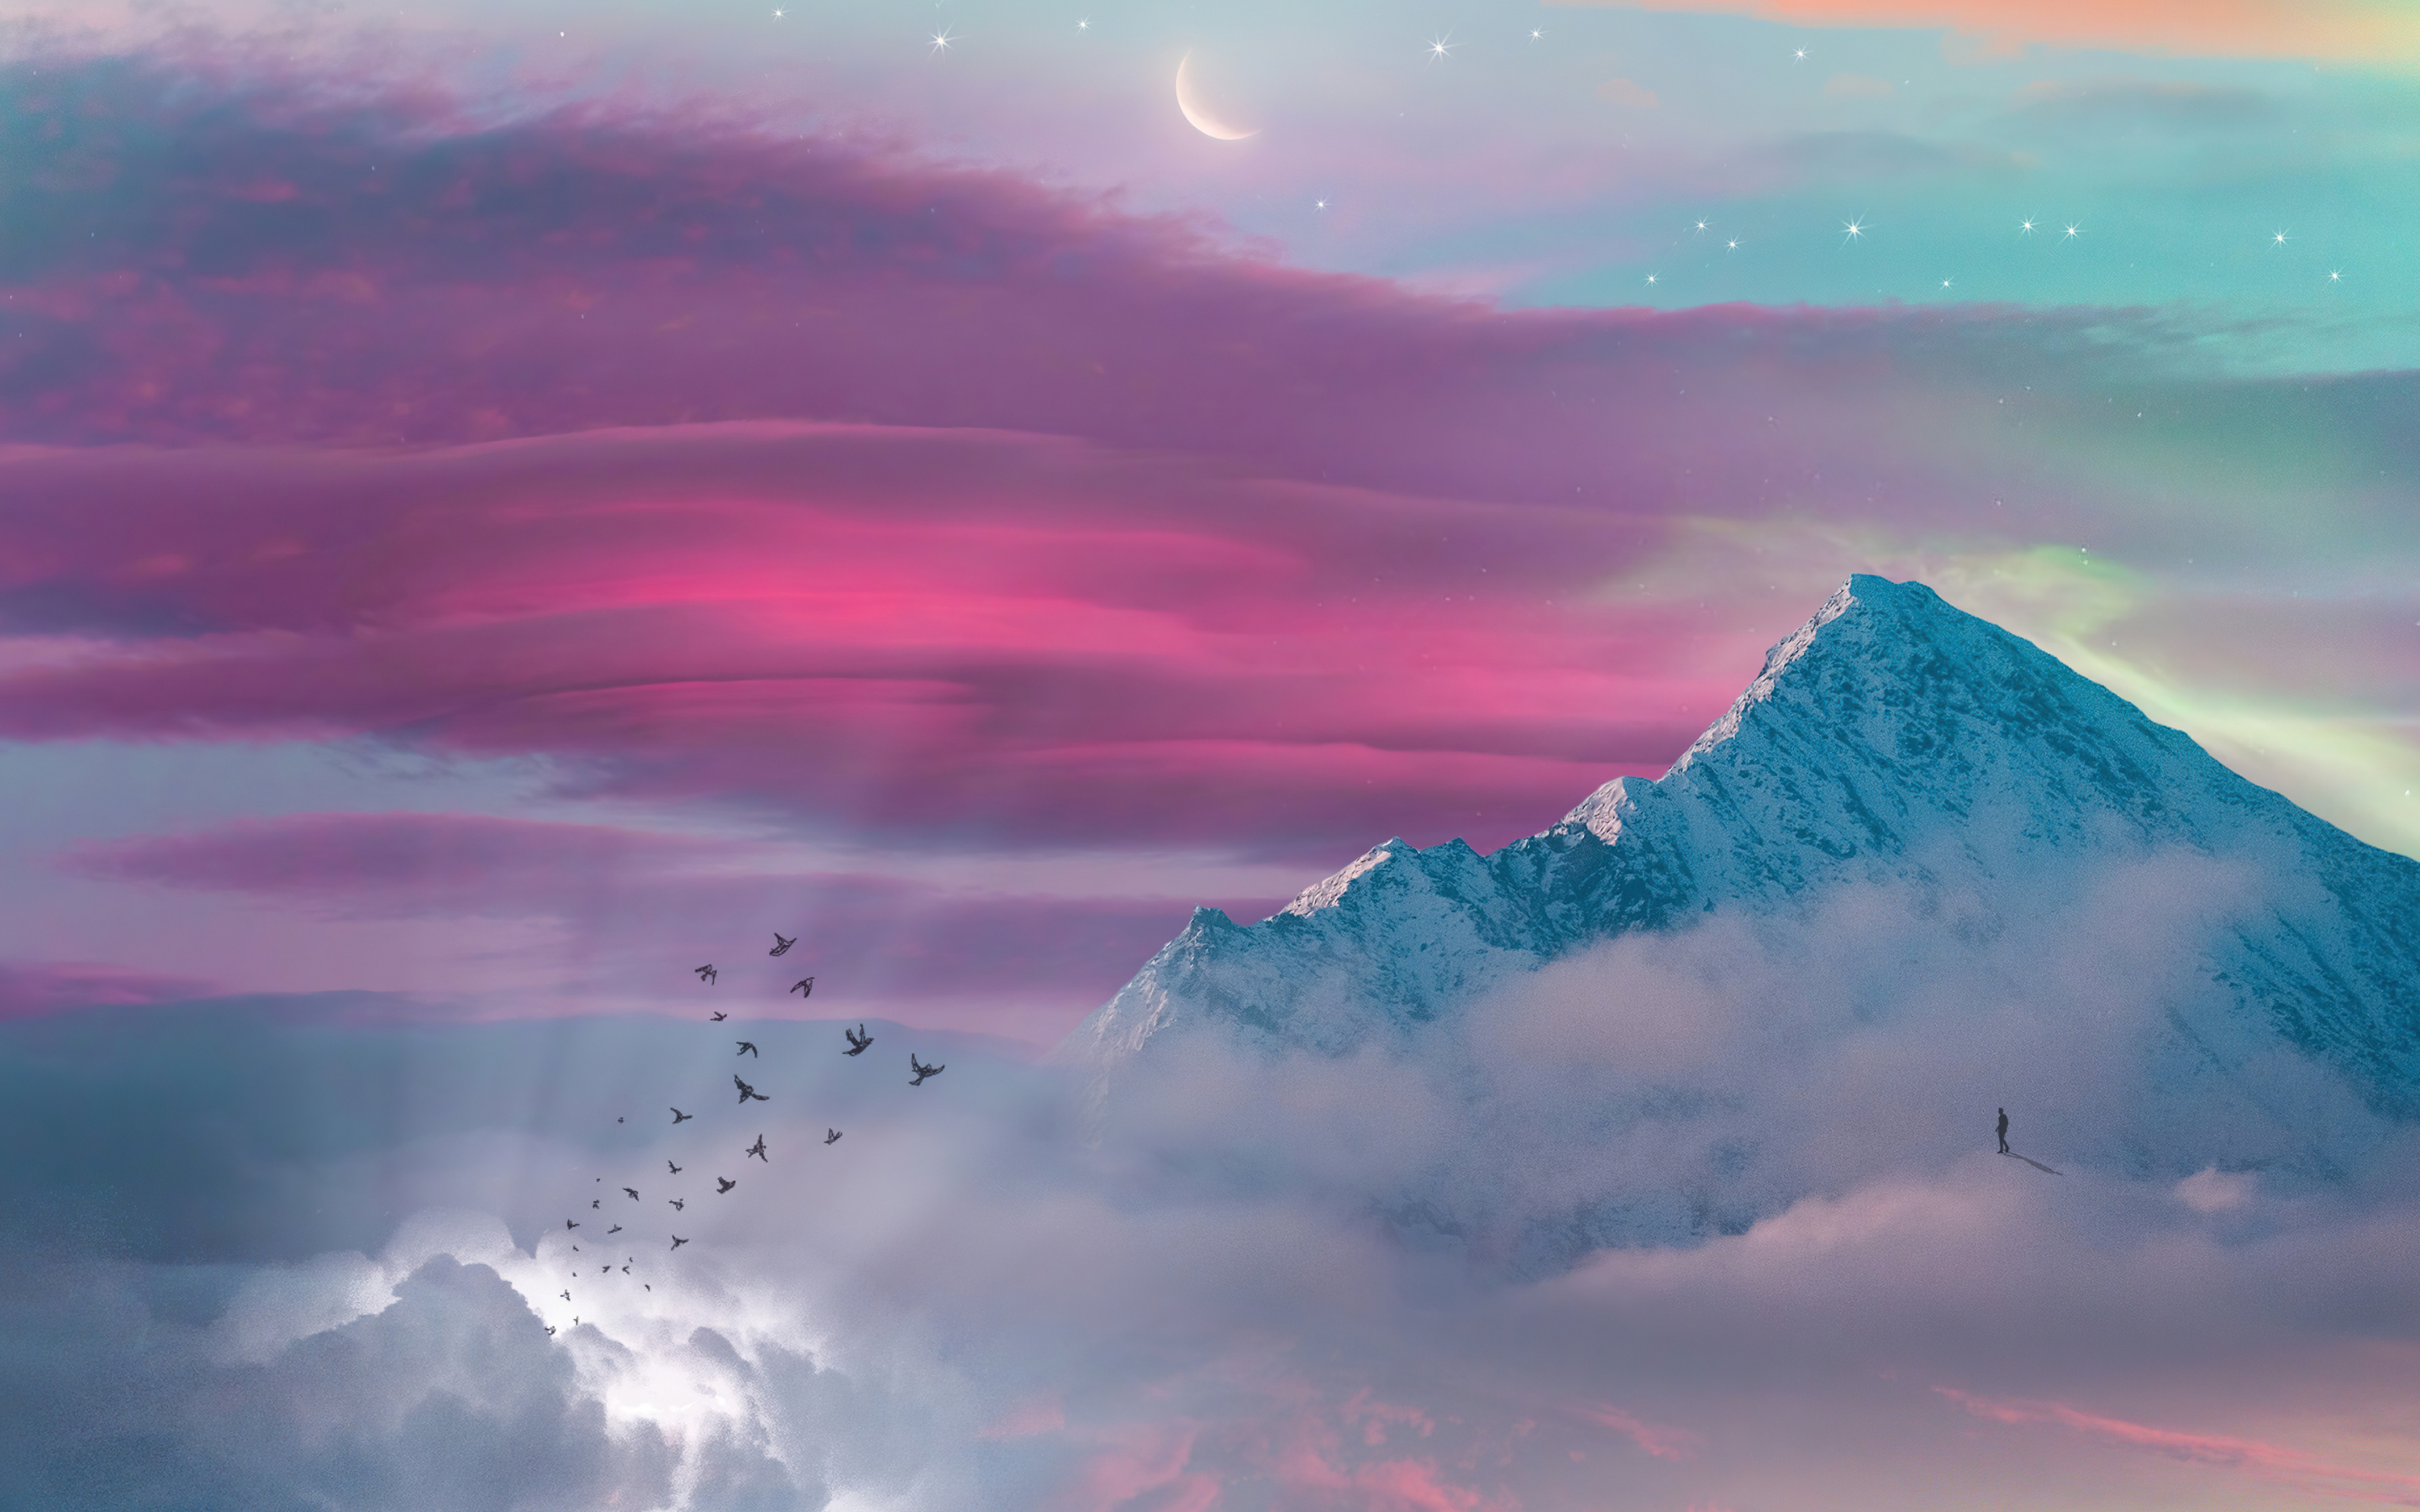 Dreaming life, glacier mountain, beautiful sky and sunset, 2880x1800 wallpaper